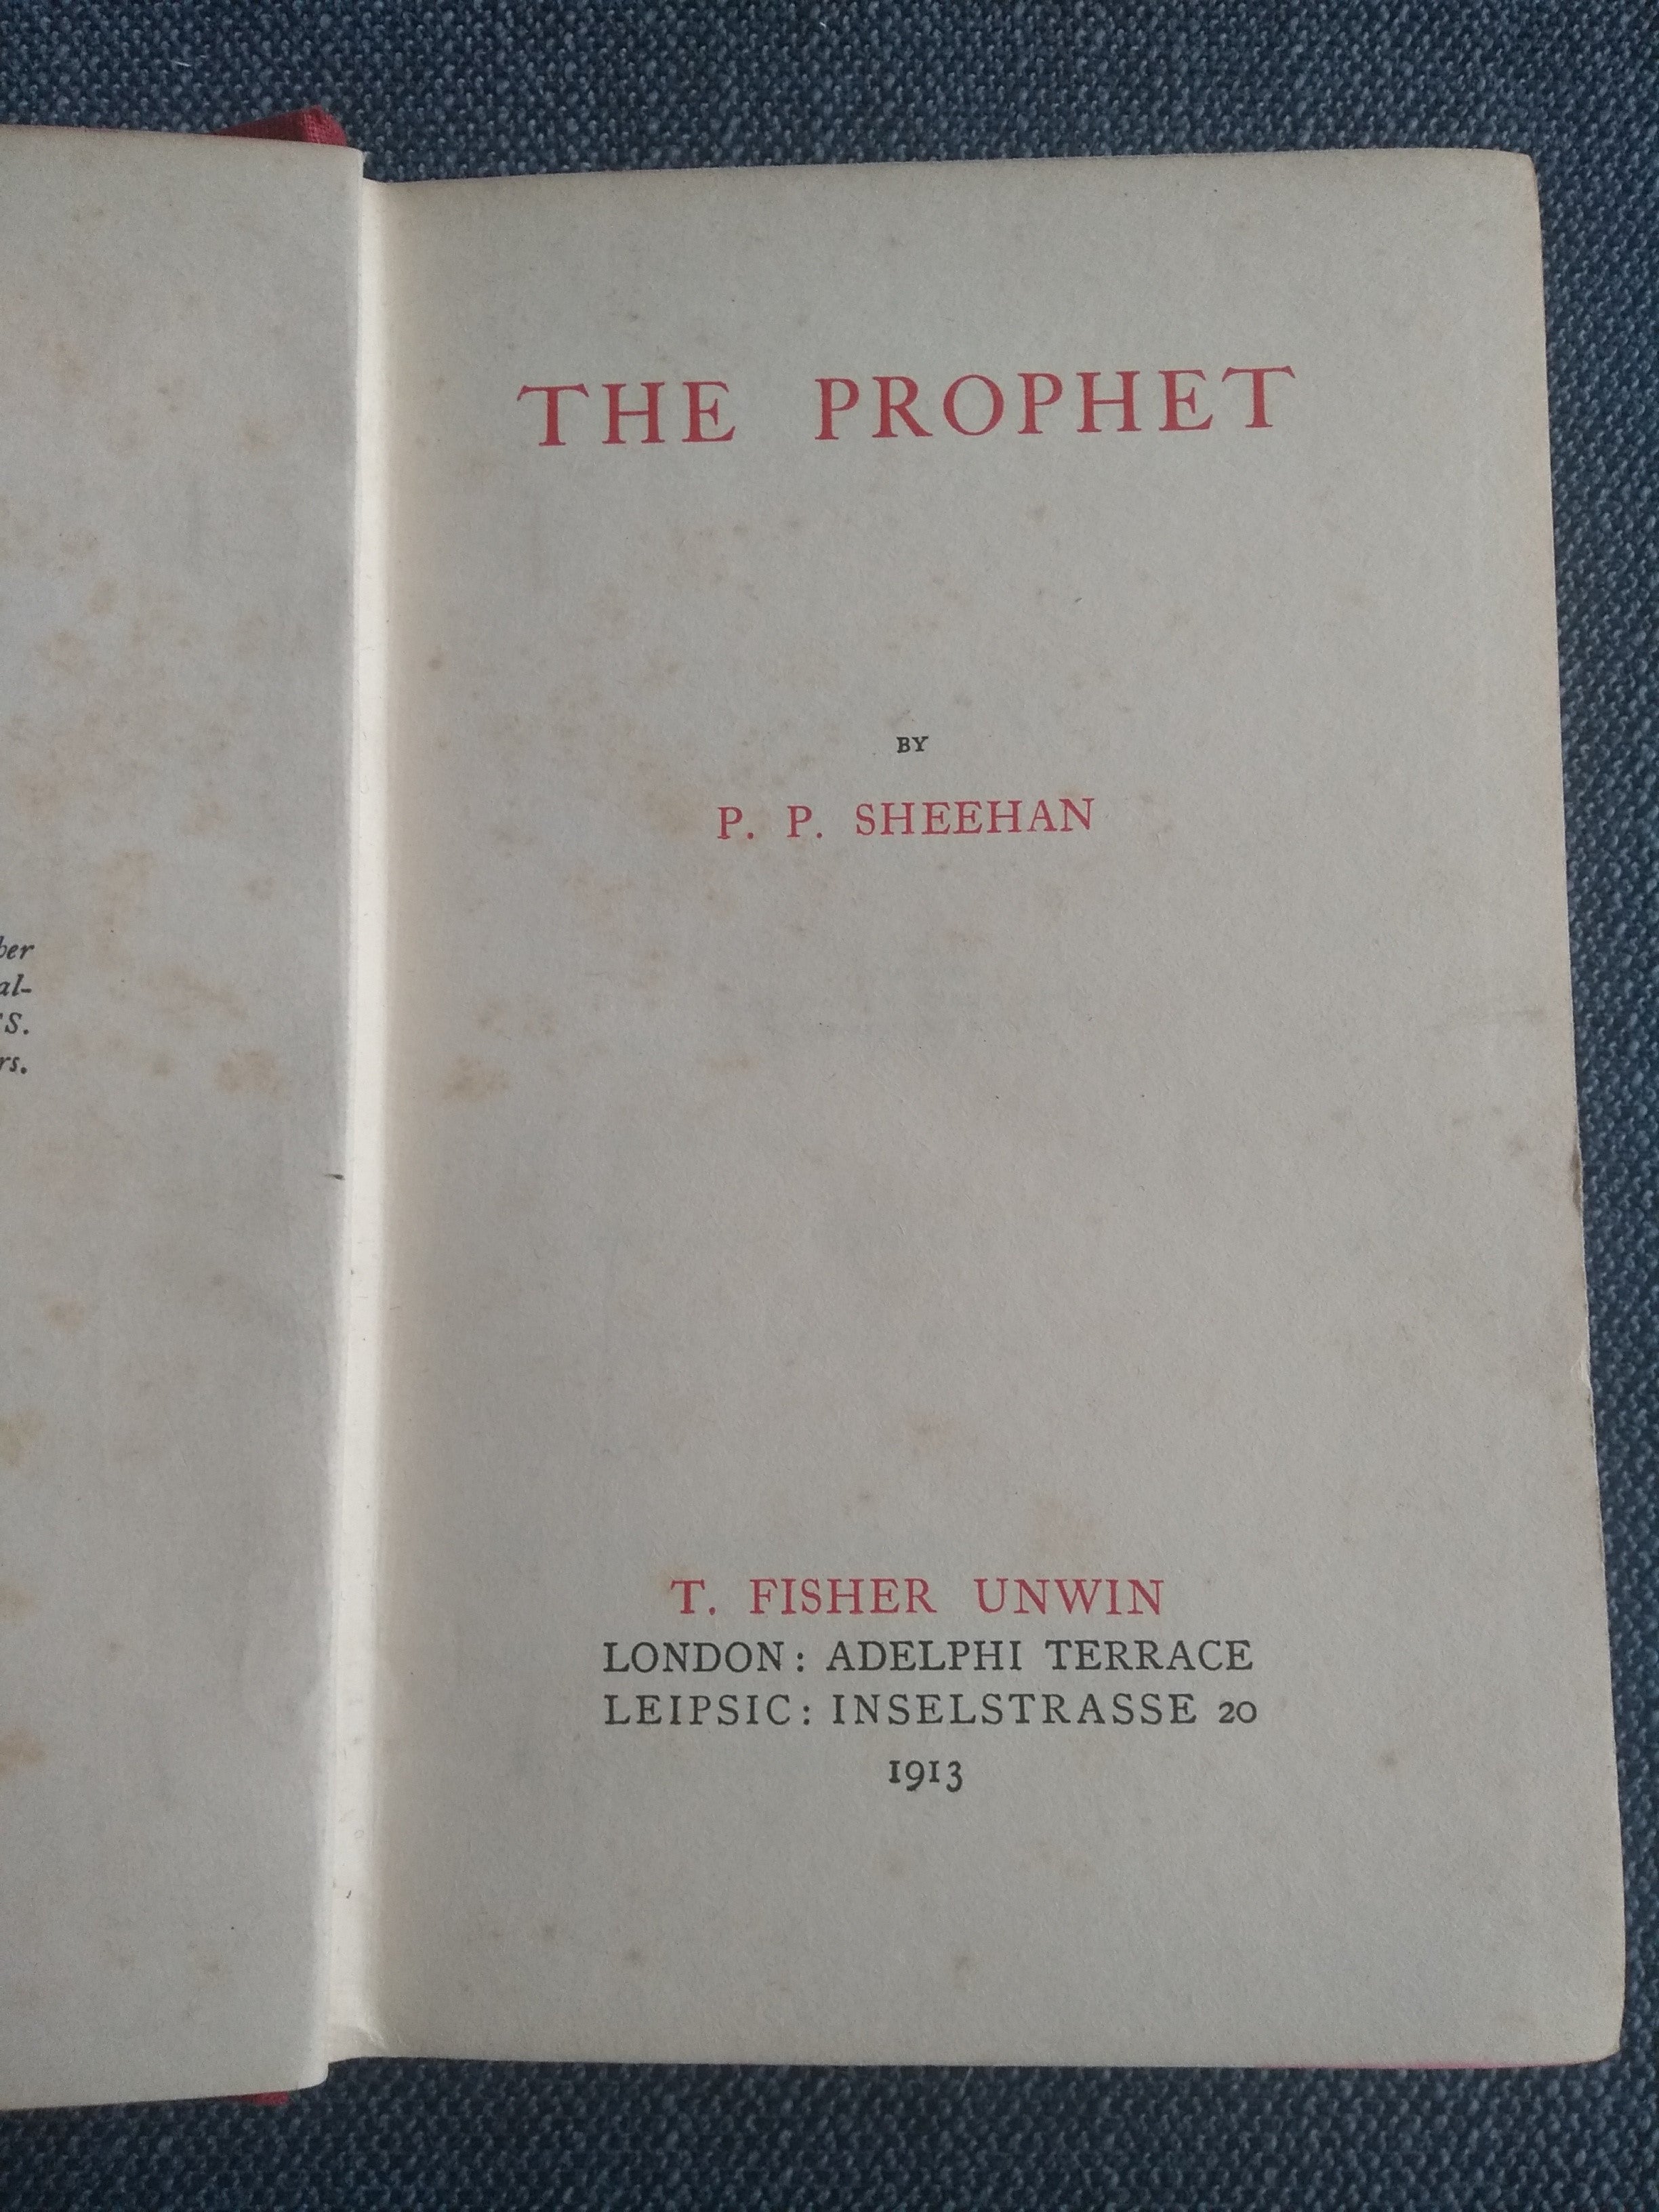 The Prophet, by P P Sheehan